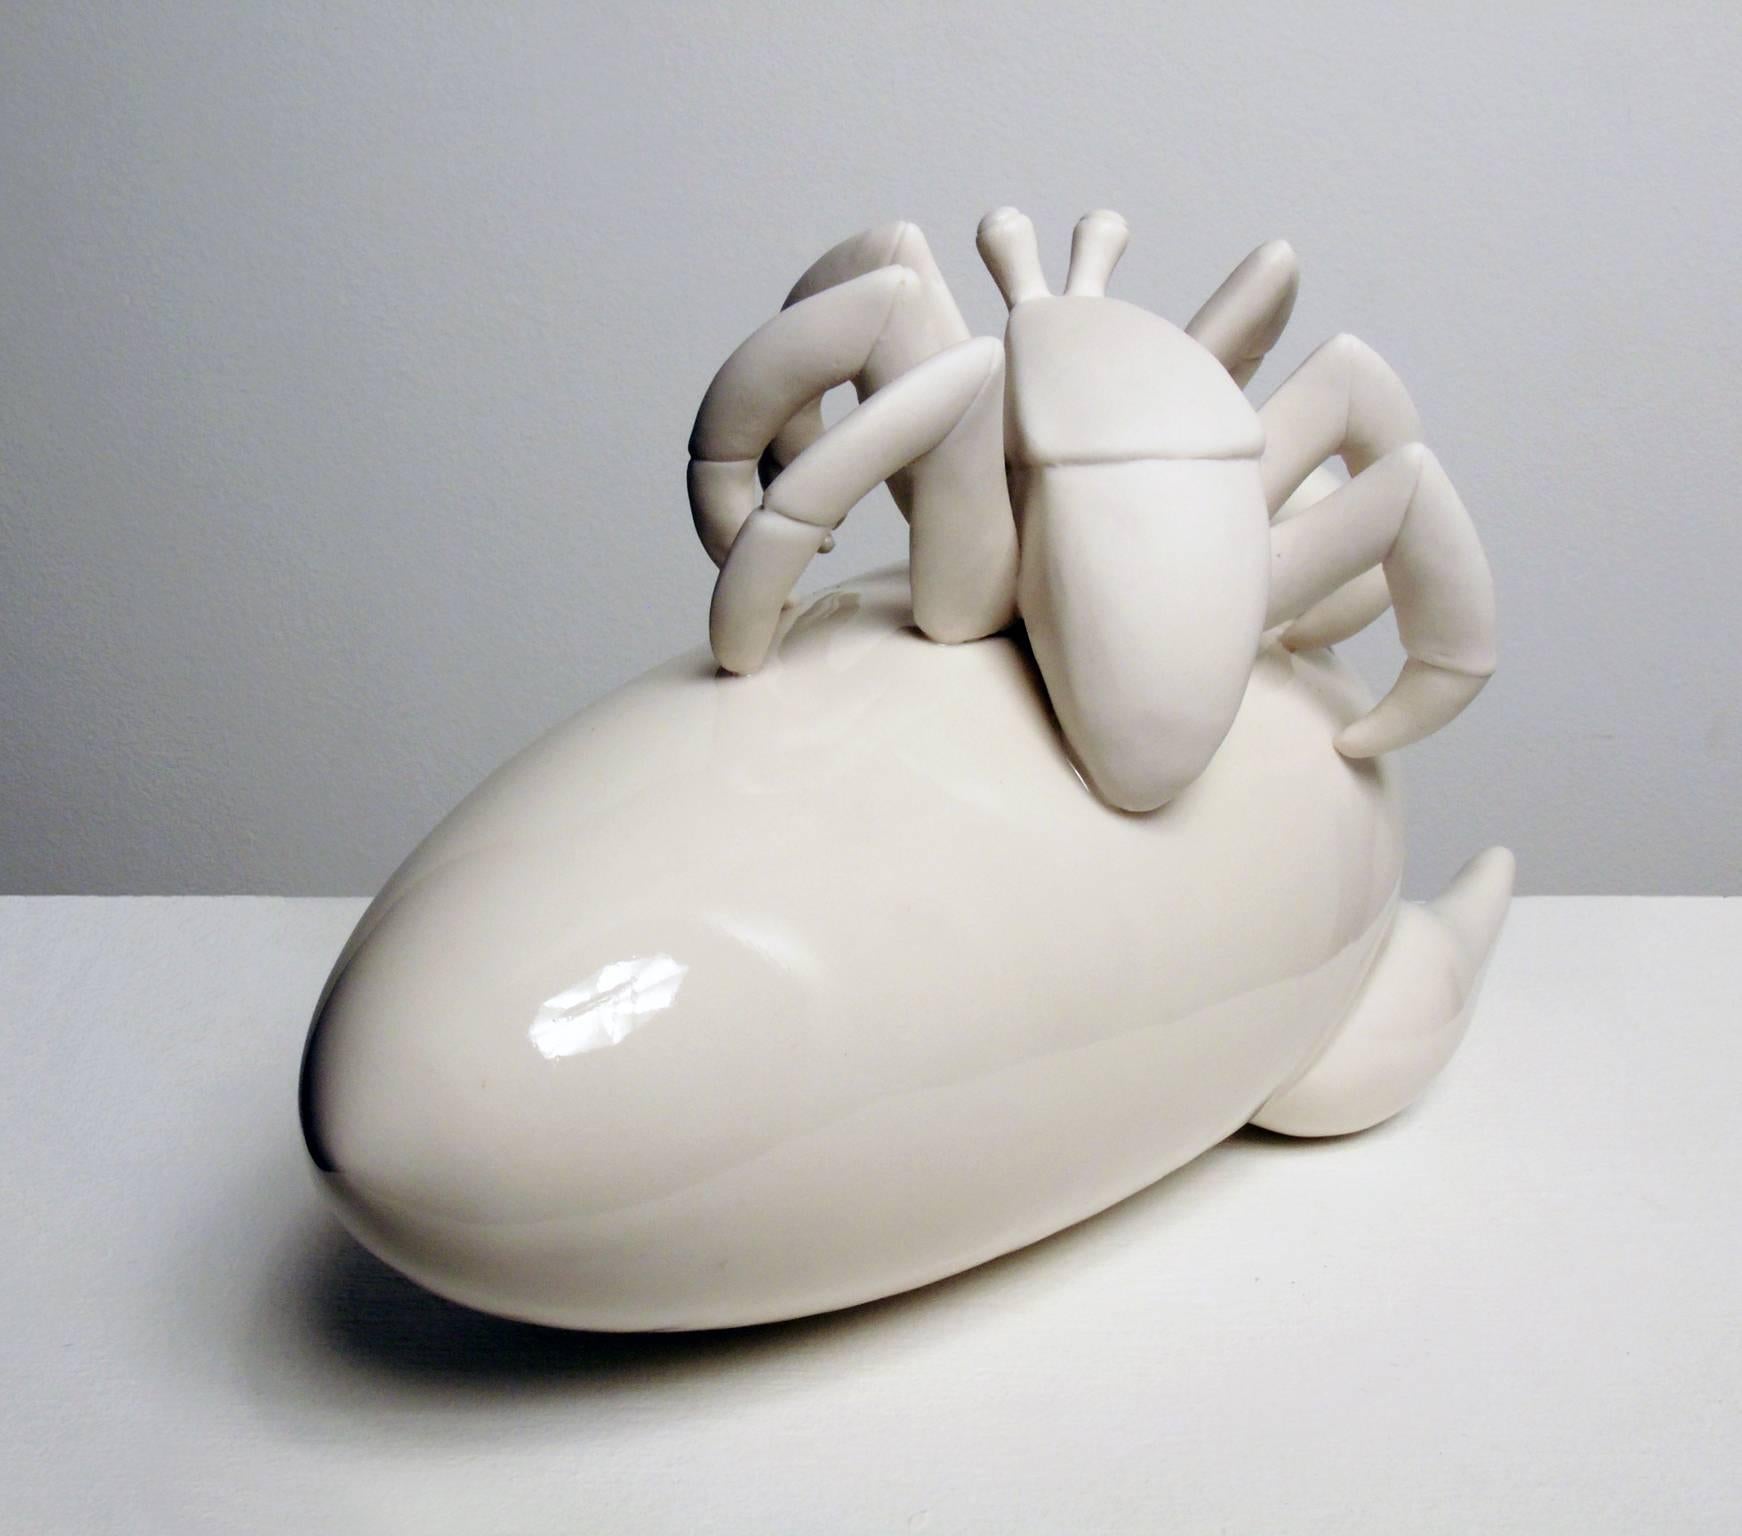 Starter Pet Adaptation in white porcelain by Bethany Krull features a stylized crab on a sideways rocket ship. Like much of Krull's creative output this piece speaks to the complicated and often contradictory relationships humans maintain with other